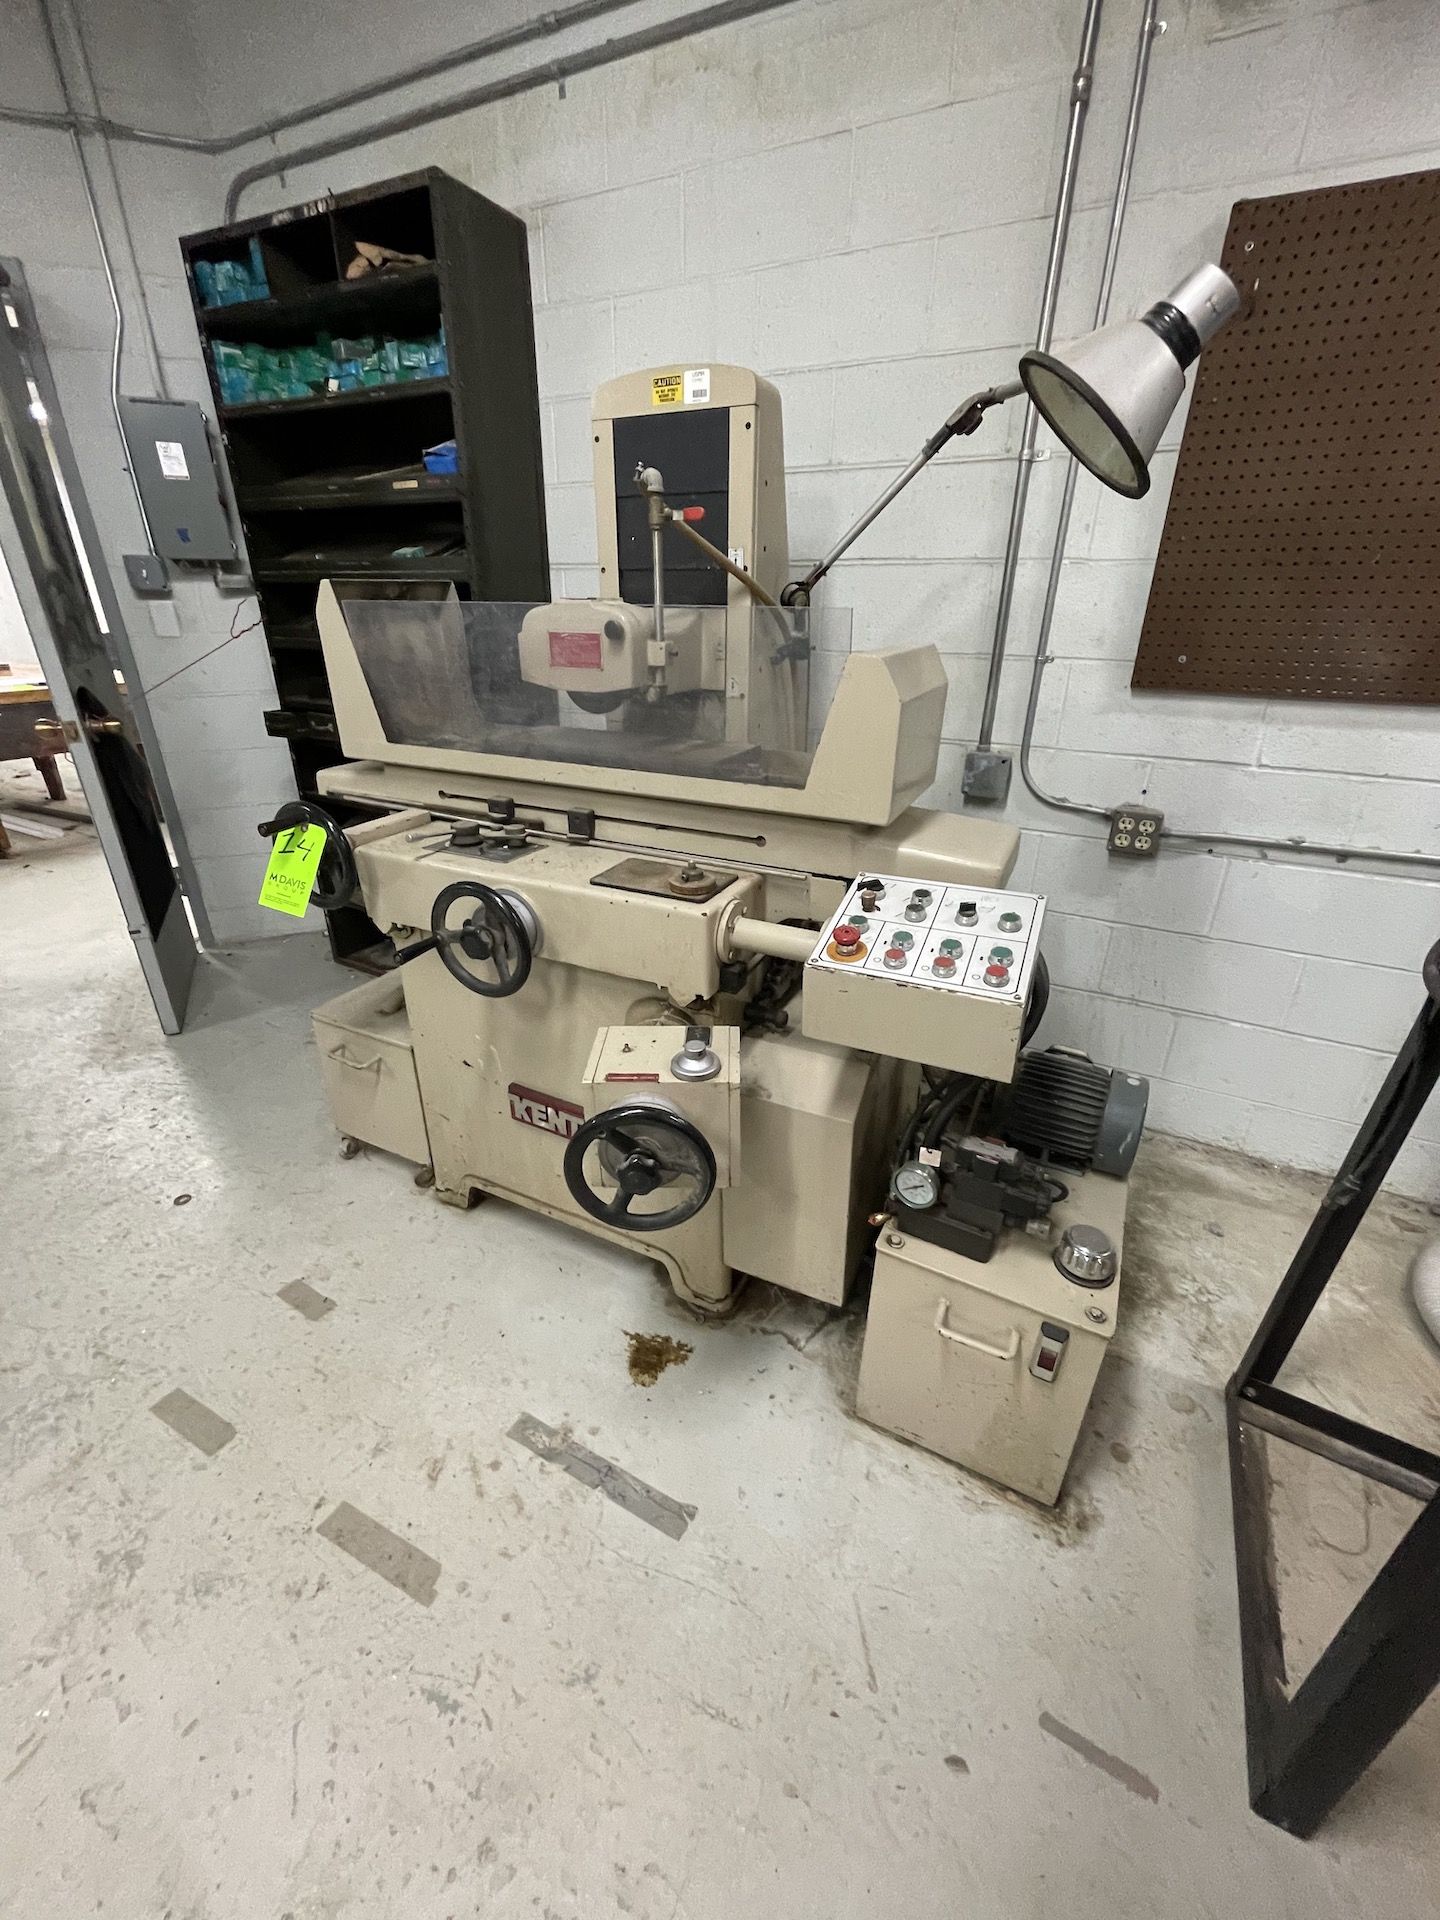 KENT SURFACE GRINDER, MODEL KGS-818AHD, S/N 85010501, INCLUDES 1 HP MOTOR (Non-Negotiable Rigging, - Image 3 of 12